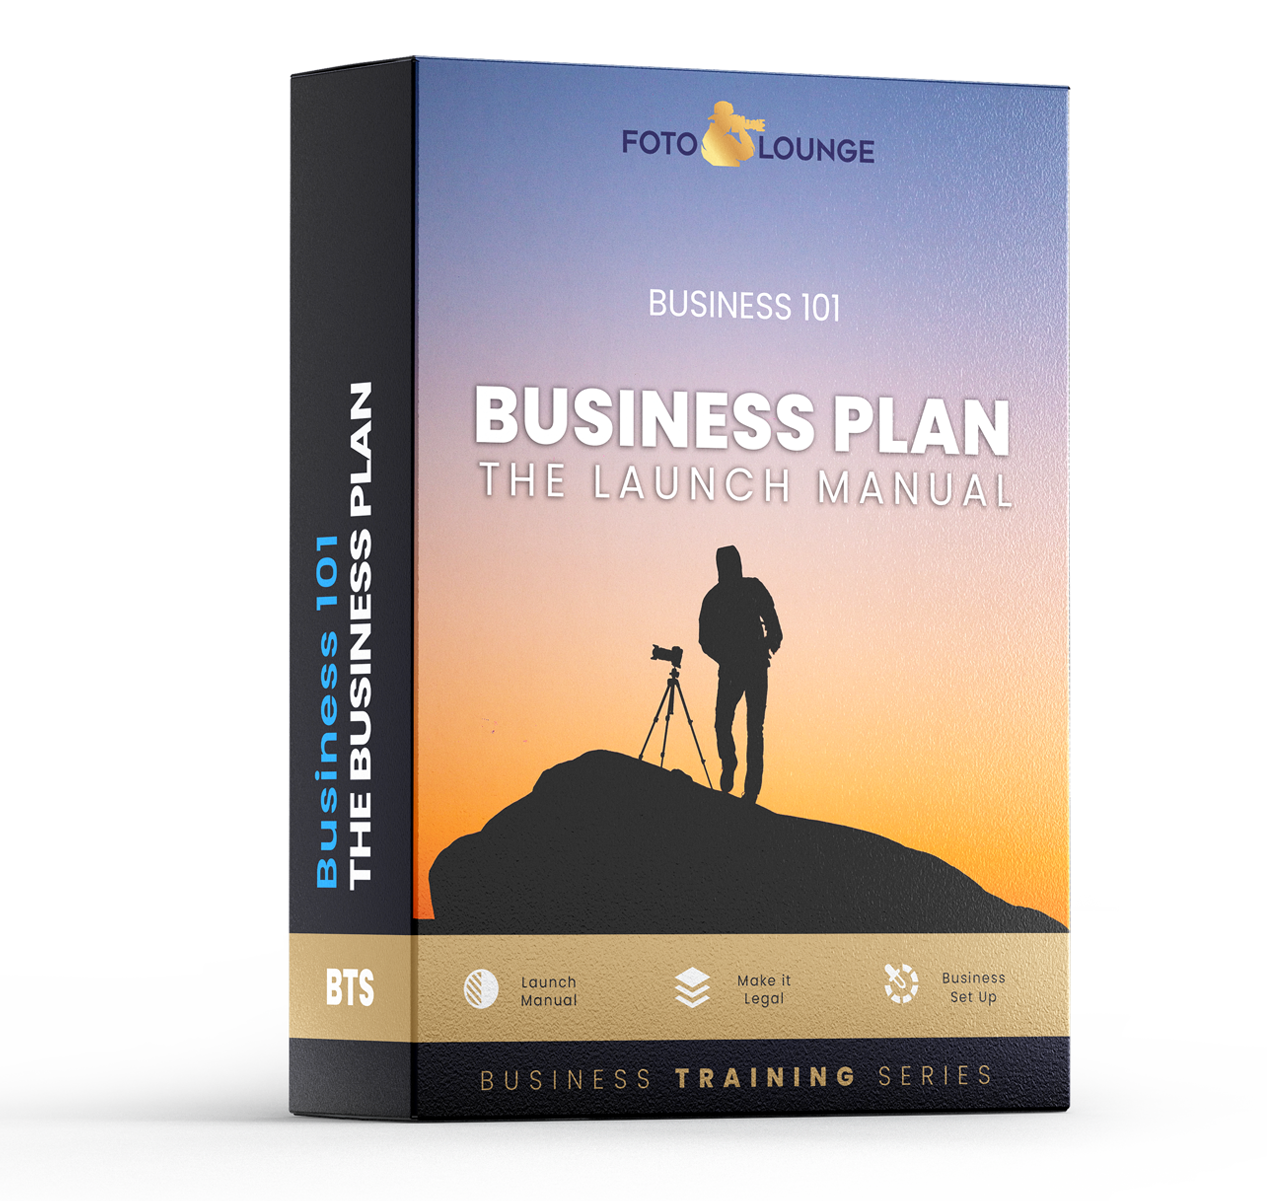 The Photographers Business Plan